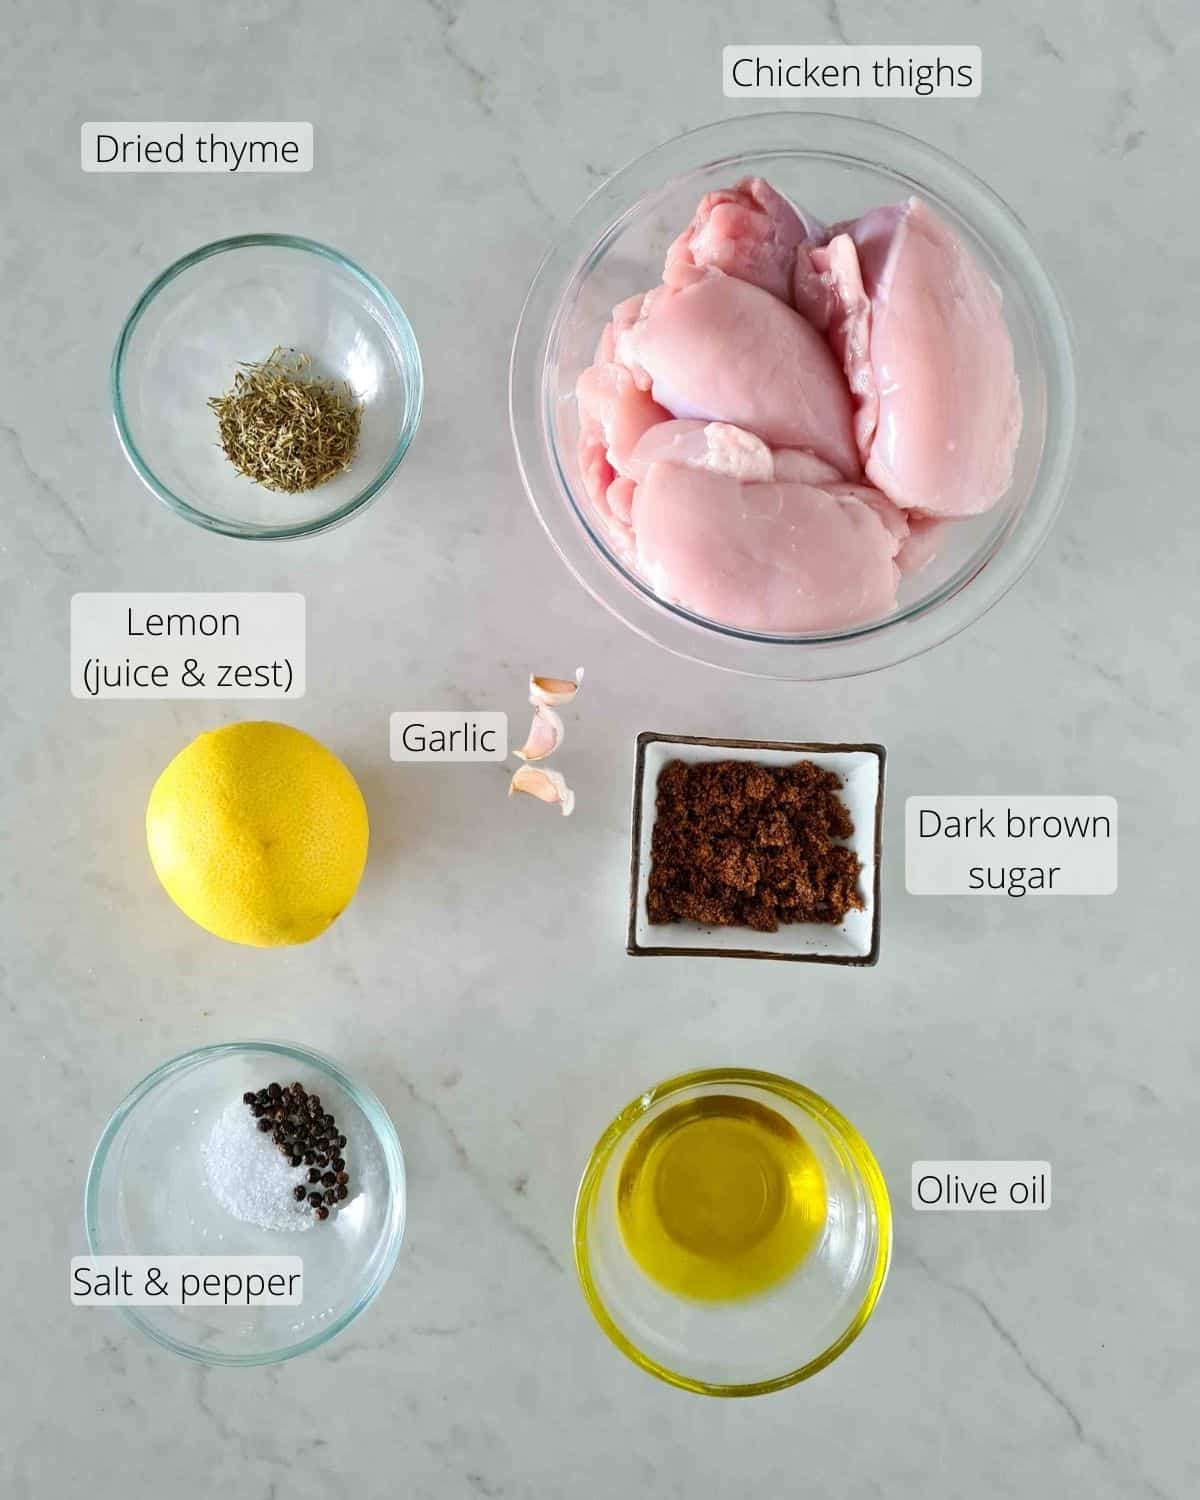 All the ingredients required for this recipe